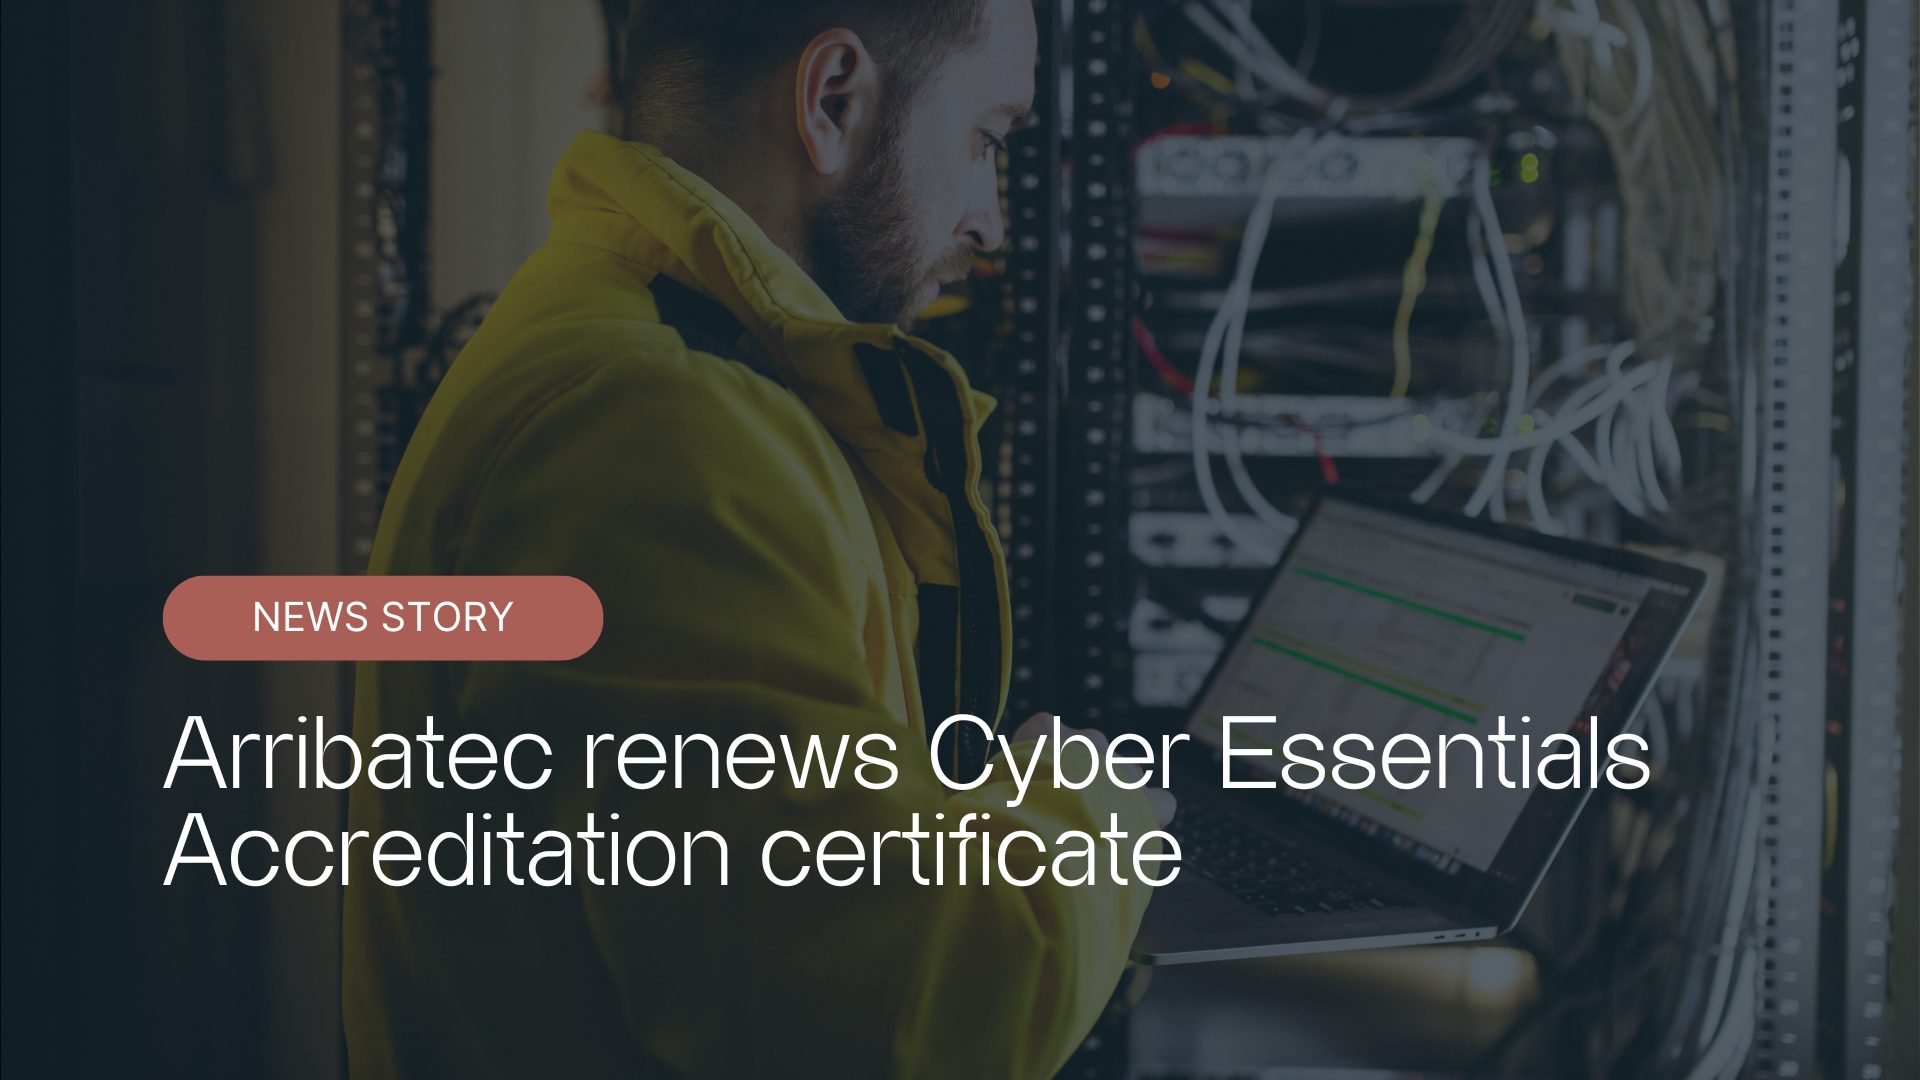 Safe and Secure: Arribatec awarded Cyber Essentials Accreditation